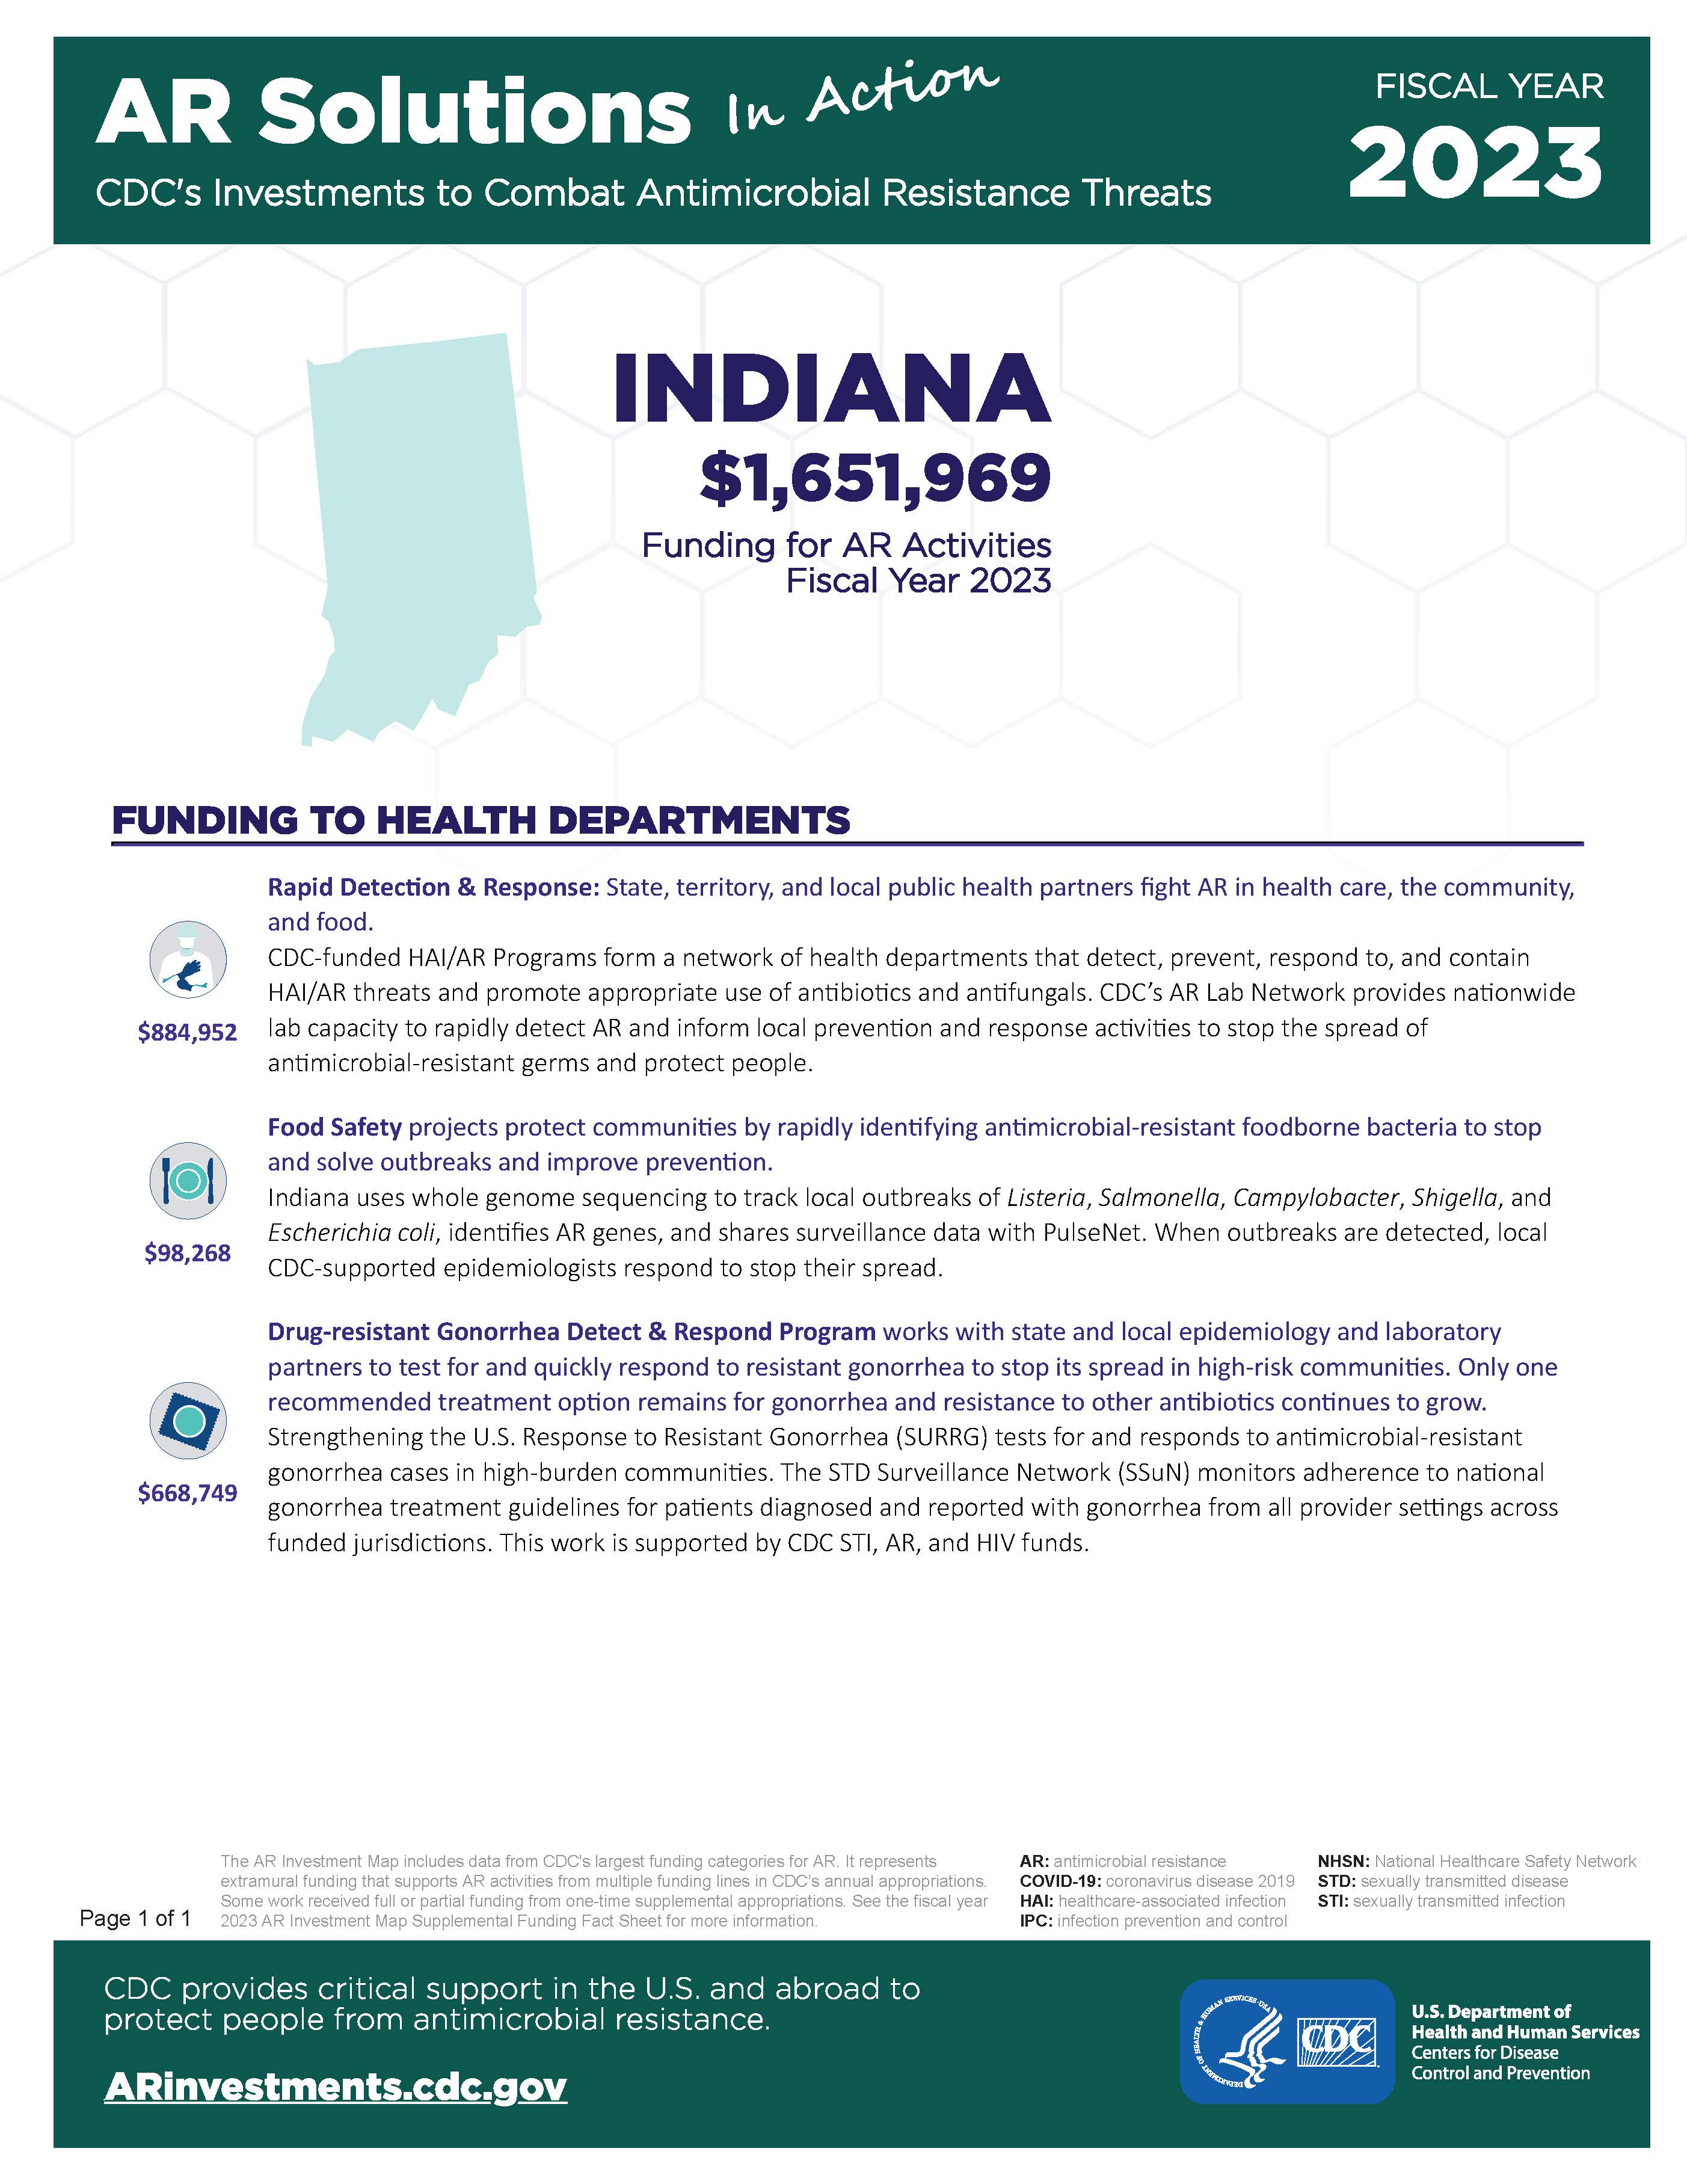 View Factsheet for Indiana